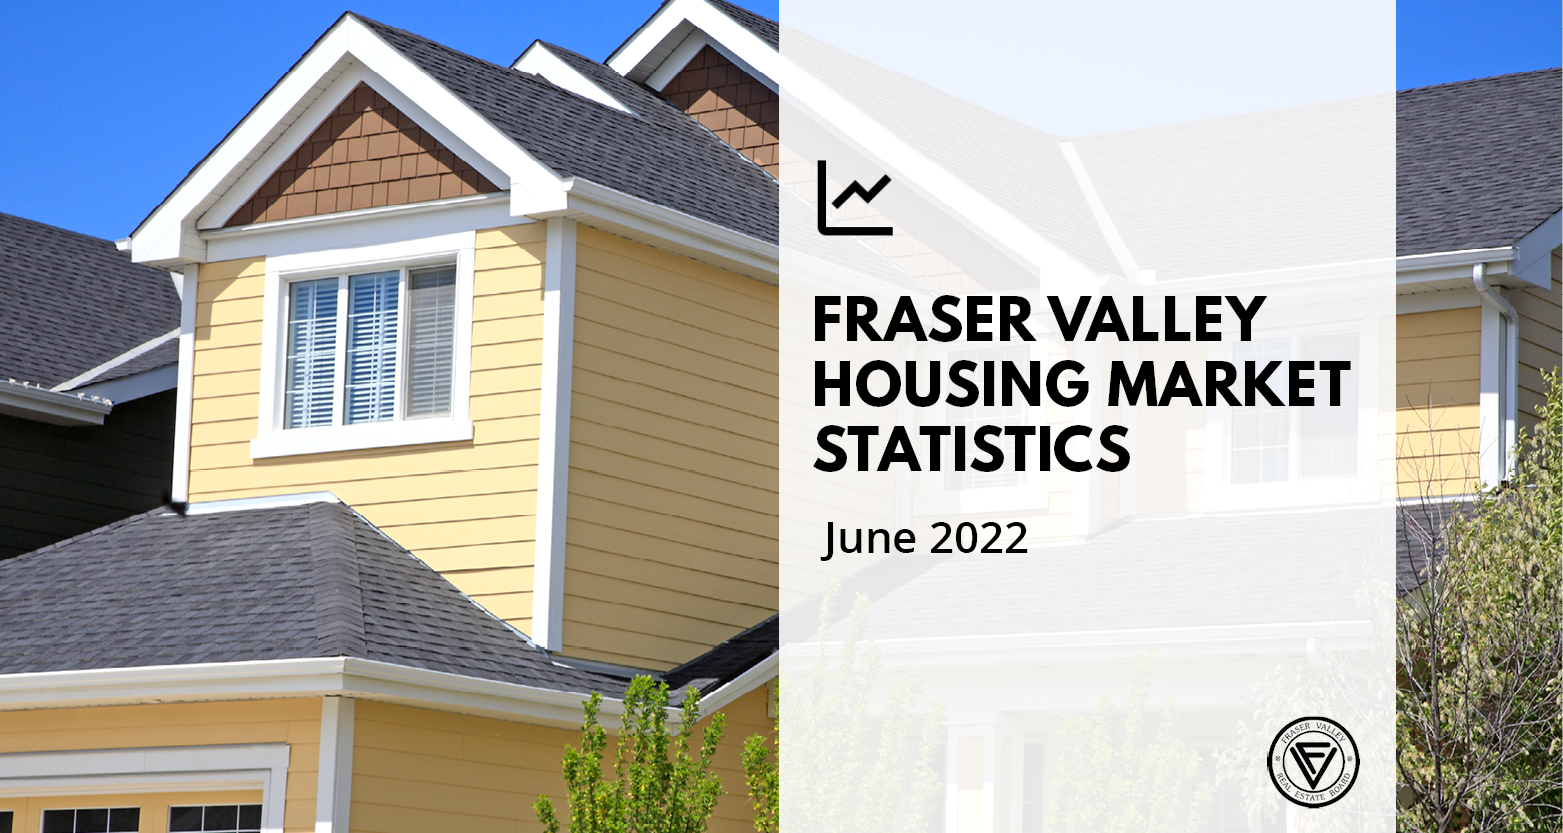 Fraser Valley real estate market cools as prices soften and supply increases.